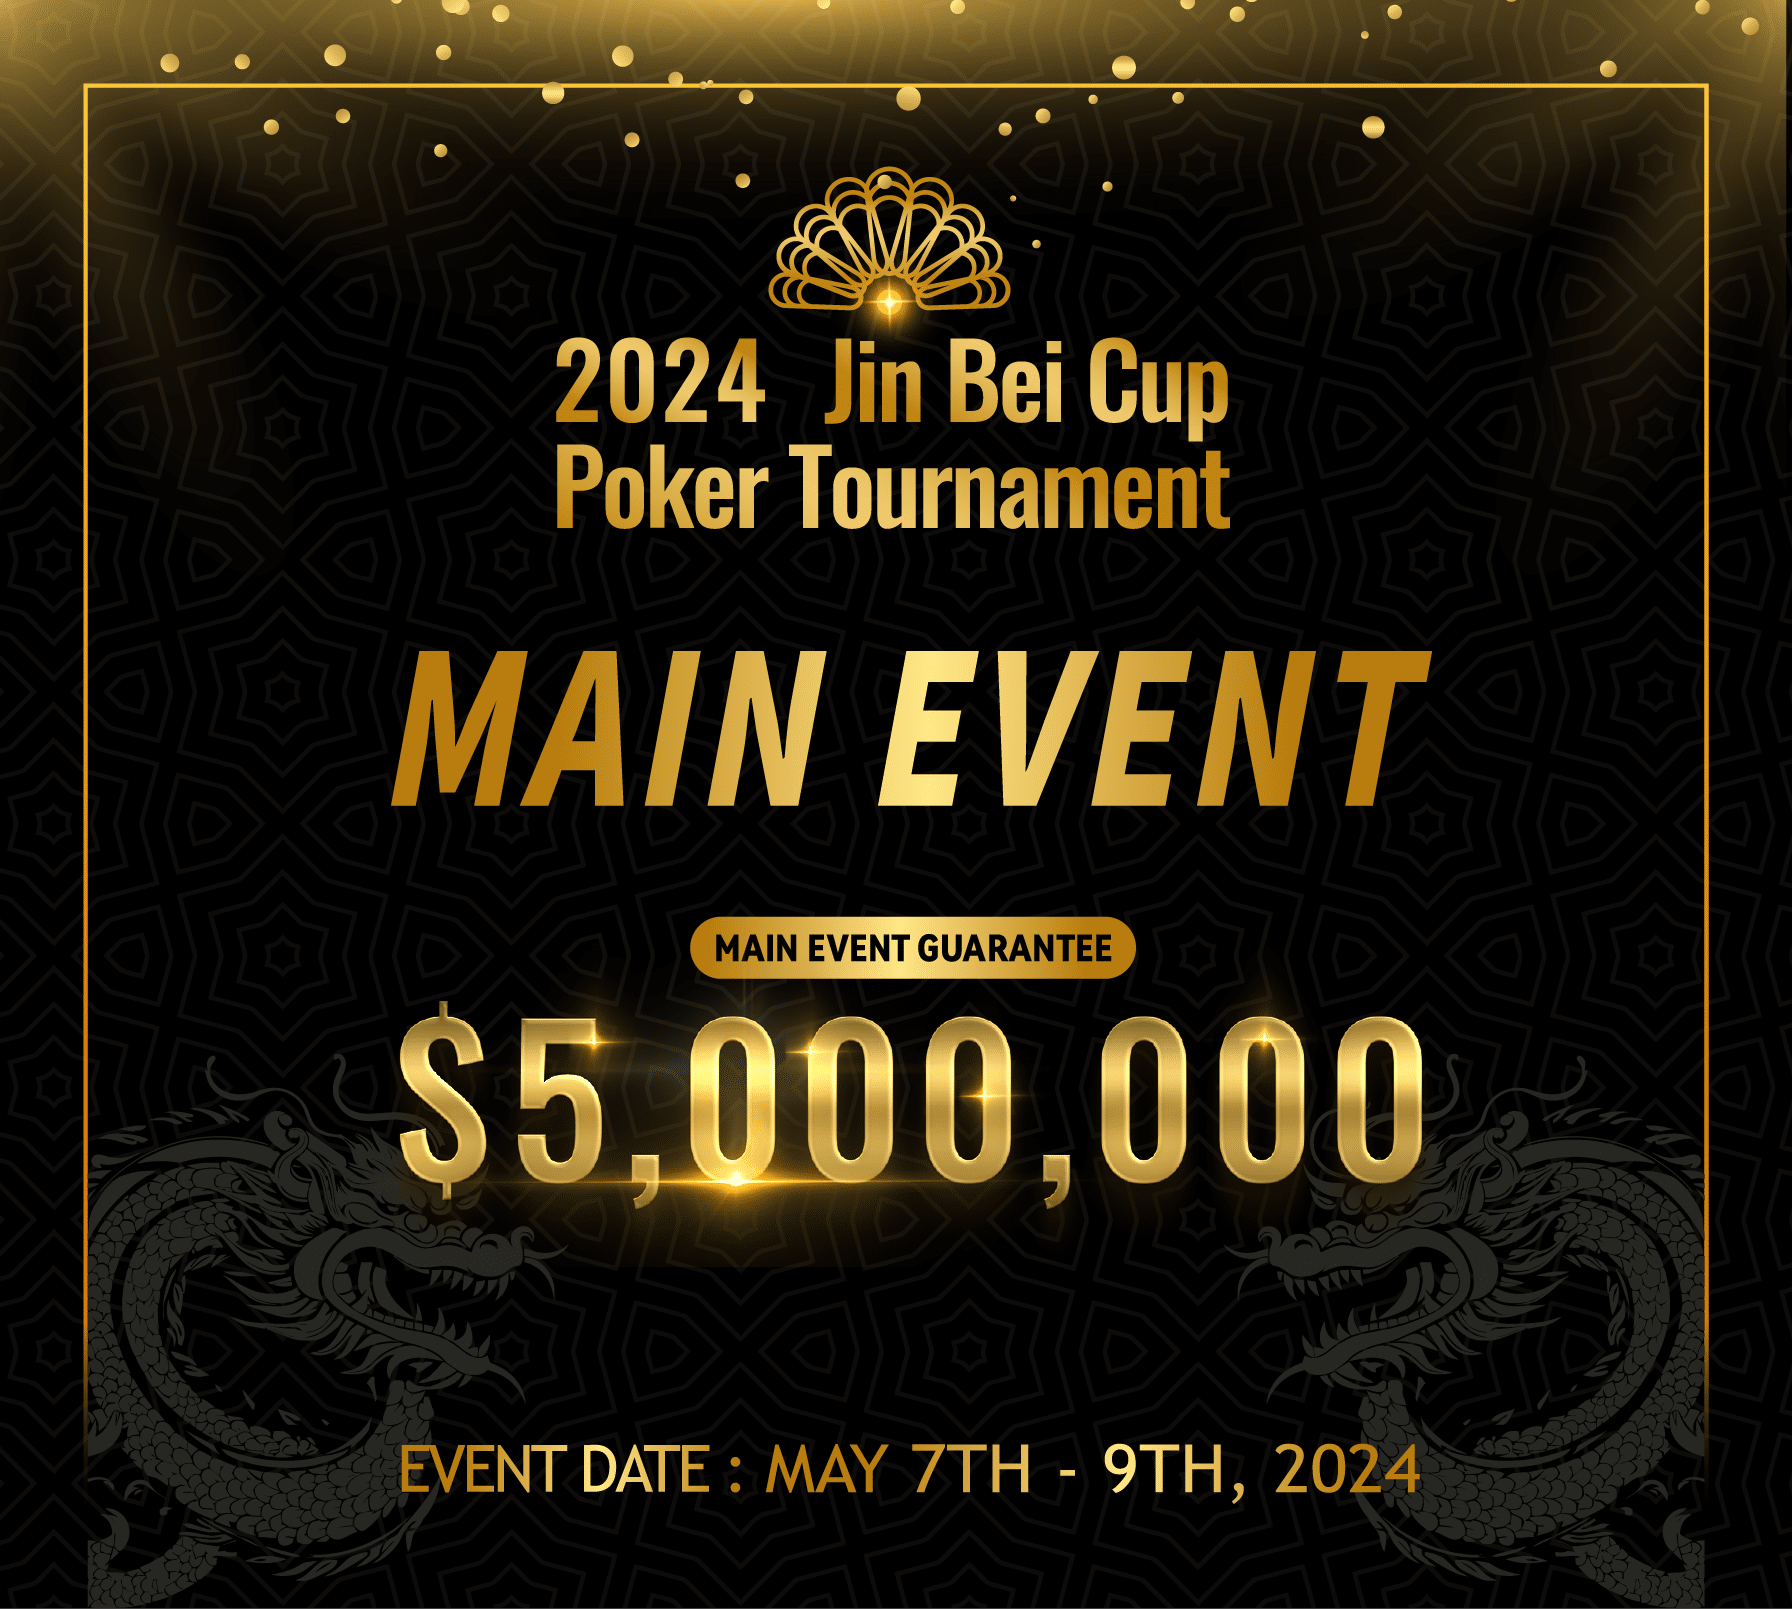 Just days away from the Inaugural Jin Bei Cup $5M Guaranteed Short Deck Series